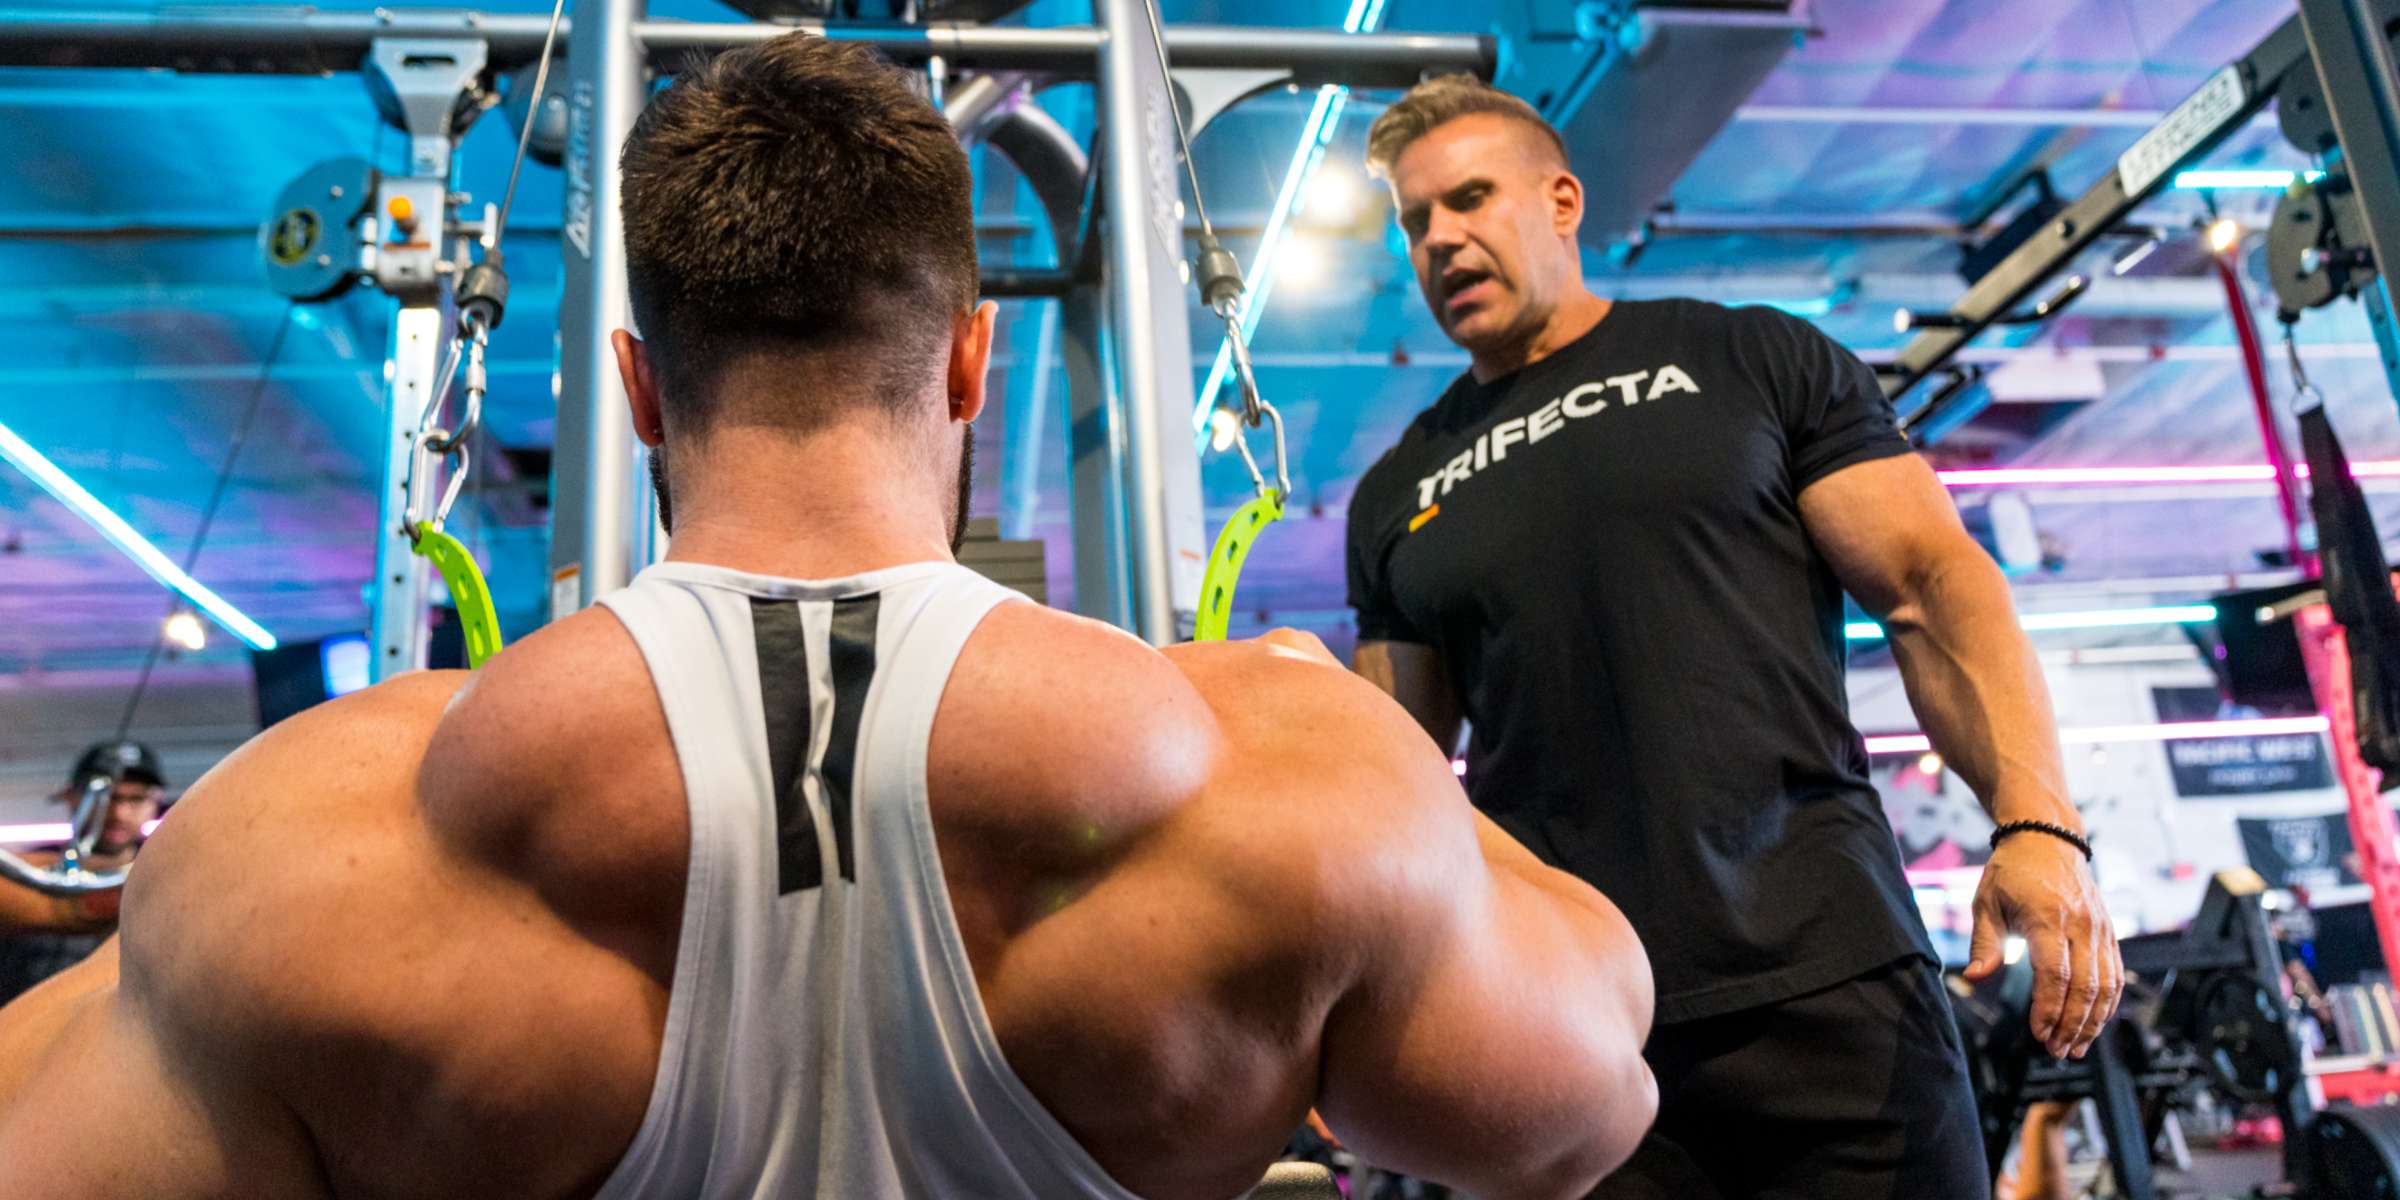 Hypertrophy Training for Muscle Growth: What it is and How to Do